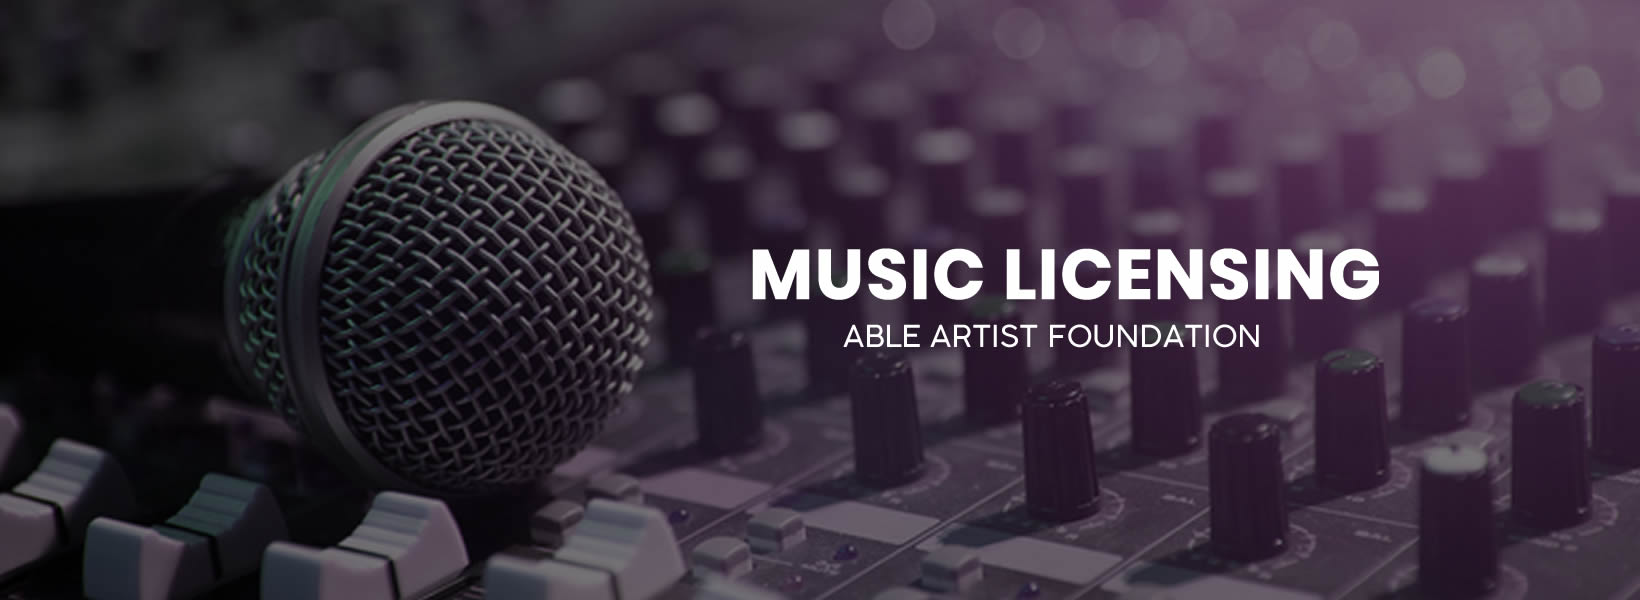 Graphic with text: Music Licensing - Able Artist Foundation